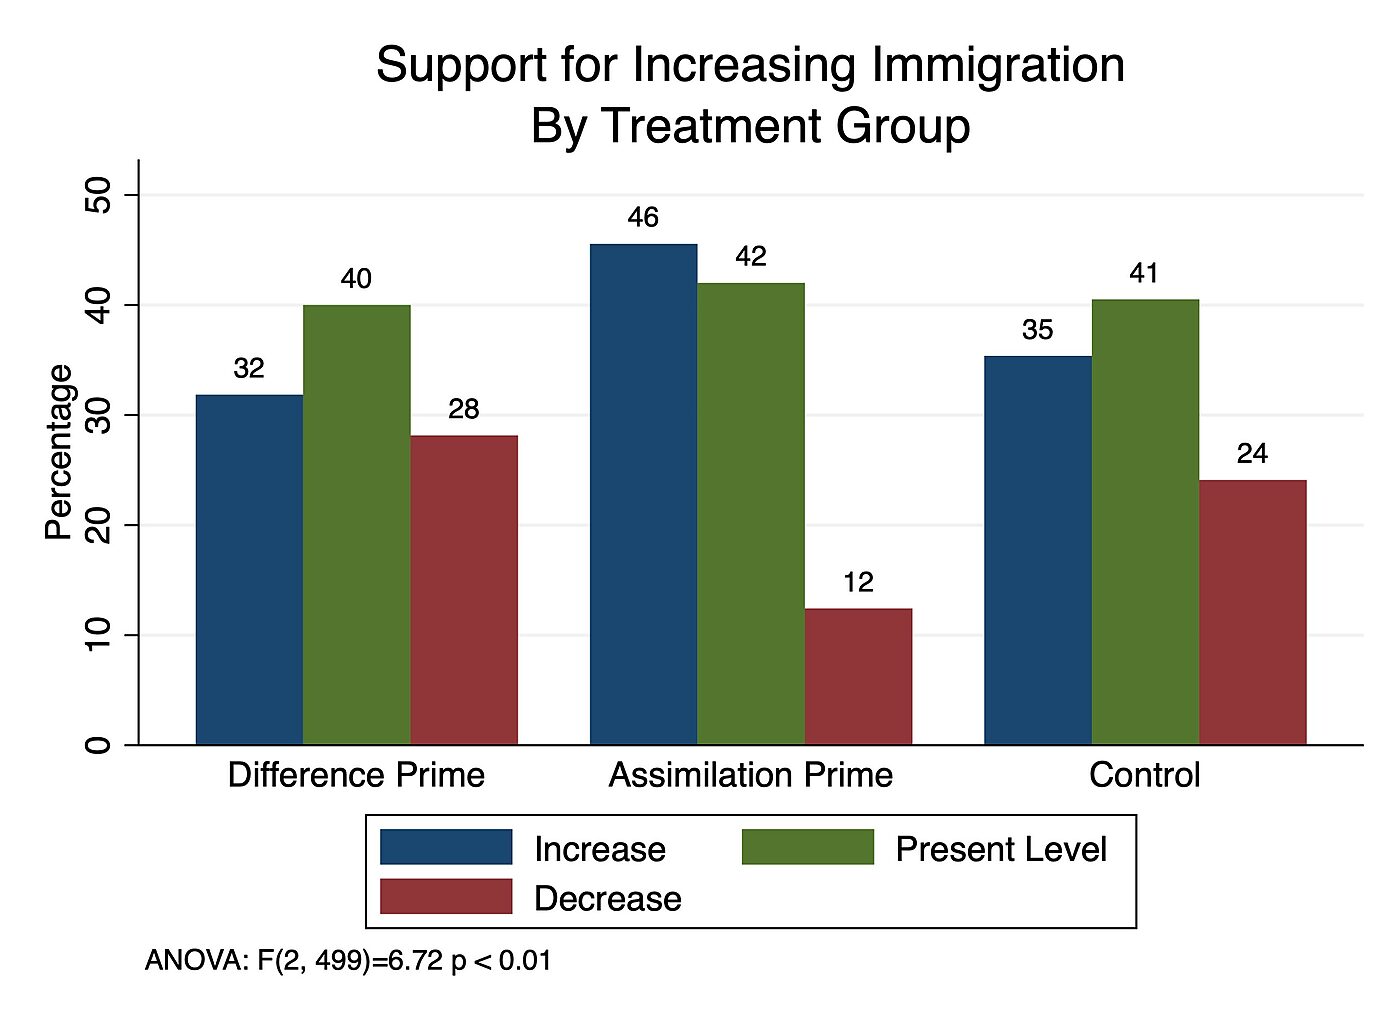 Support for increasing immigration by treatment group